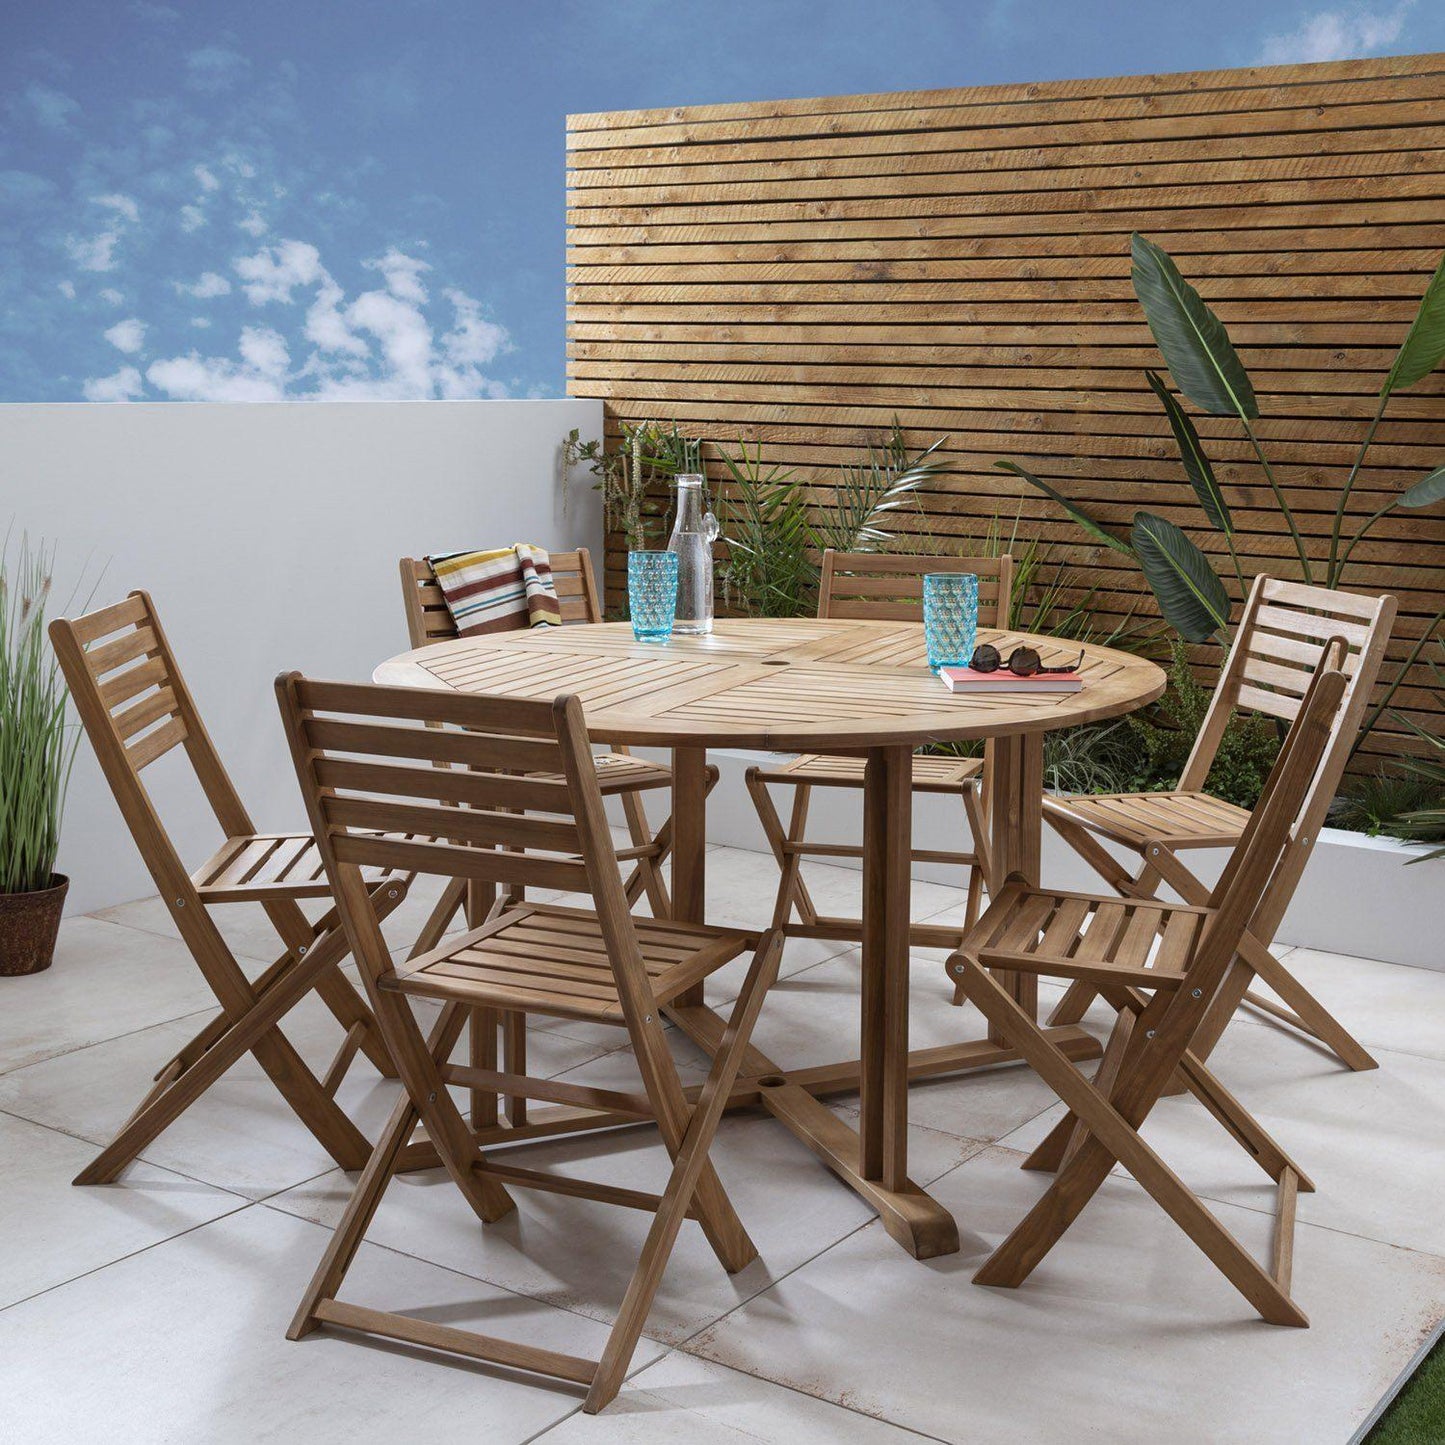 Casey wooden garden furniture - 6 seater outdoor dining set with grey parasol - Laura James